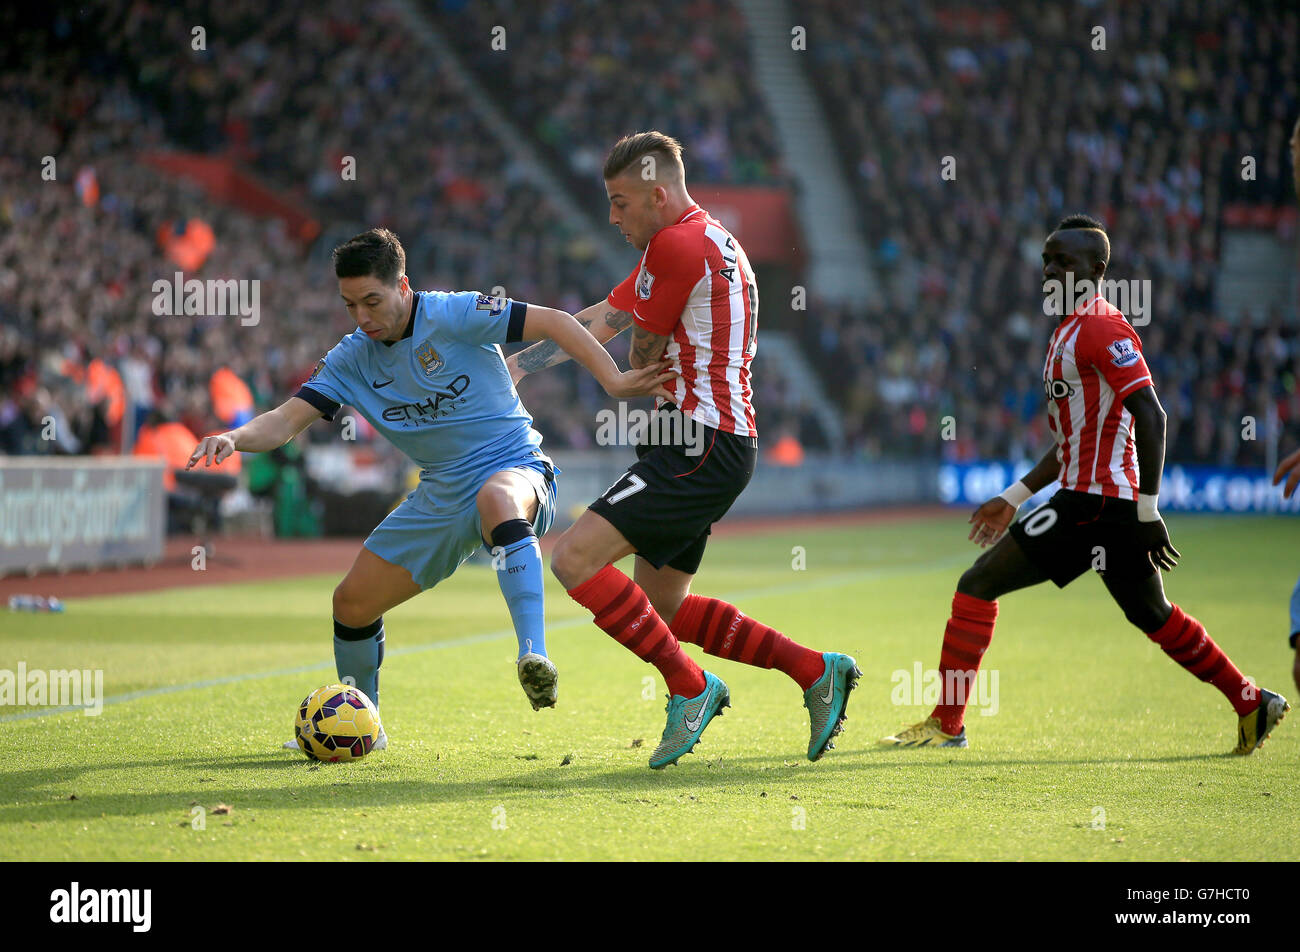 Manchester City's Samir Nasri battles for the ball with Southampton's Toby Alderweireld during the Barclays Premier League match at St Mary's Stadium, Southampton. PRESS ASSOCIATION Photo. Picture date: Sunday November 30, 2014. See PA story SOCCER Southampton. Photo credit should read Nick Potts/PA Wire. Maximum 45 images during a match. No video emulation or promotion as 'live'. No use in games, competitions, merchandise, betting or single club/player services. No use with unofficial audio, video, data, fixtures or club/league logos. Stock Photo